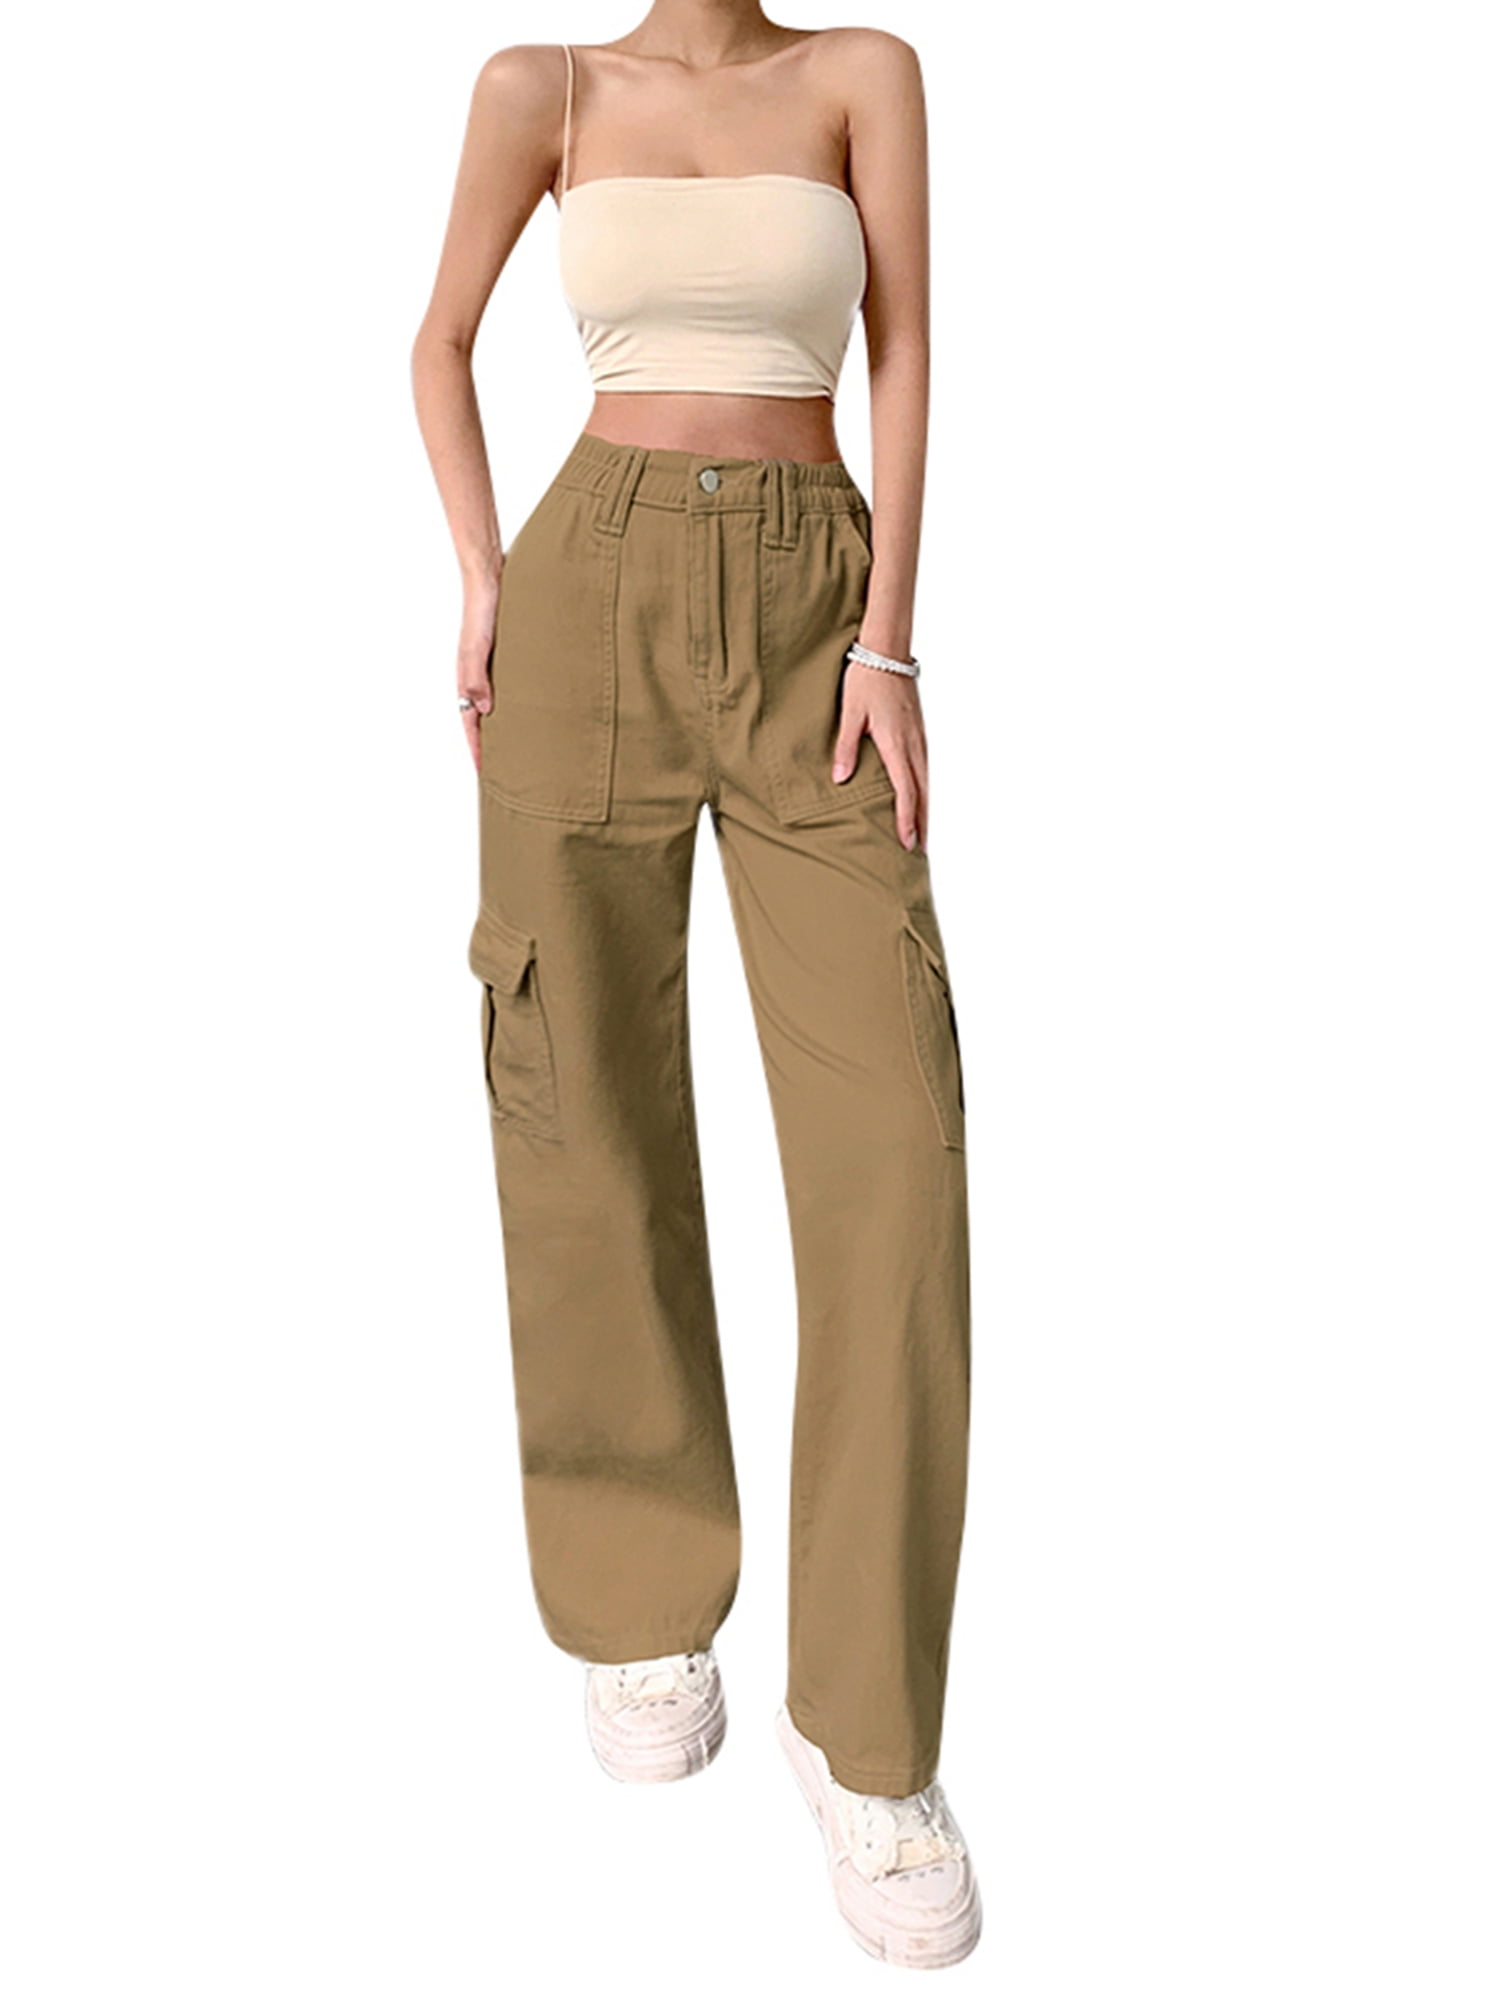 FOCUSNORM High Waist Baggy Cargo Jeans for Women Flap Pocket Relaxed Fit  Straight Wide Leg Y2K Pants